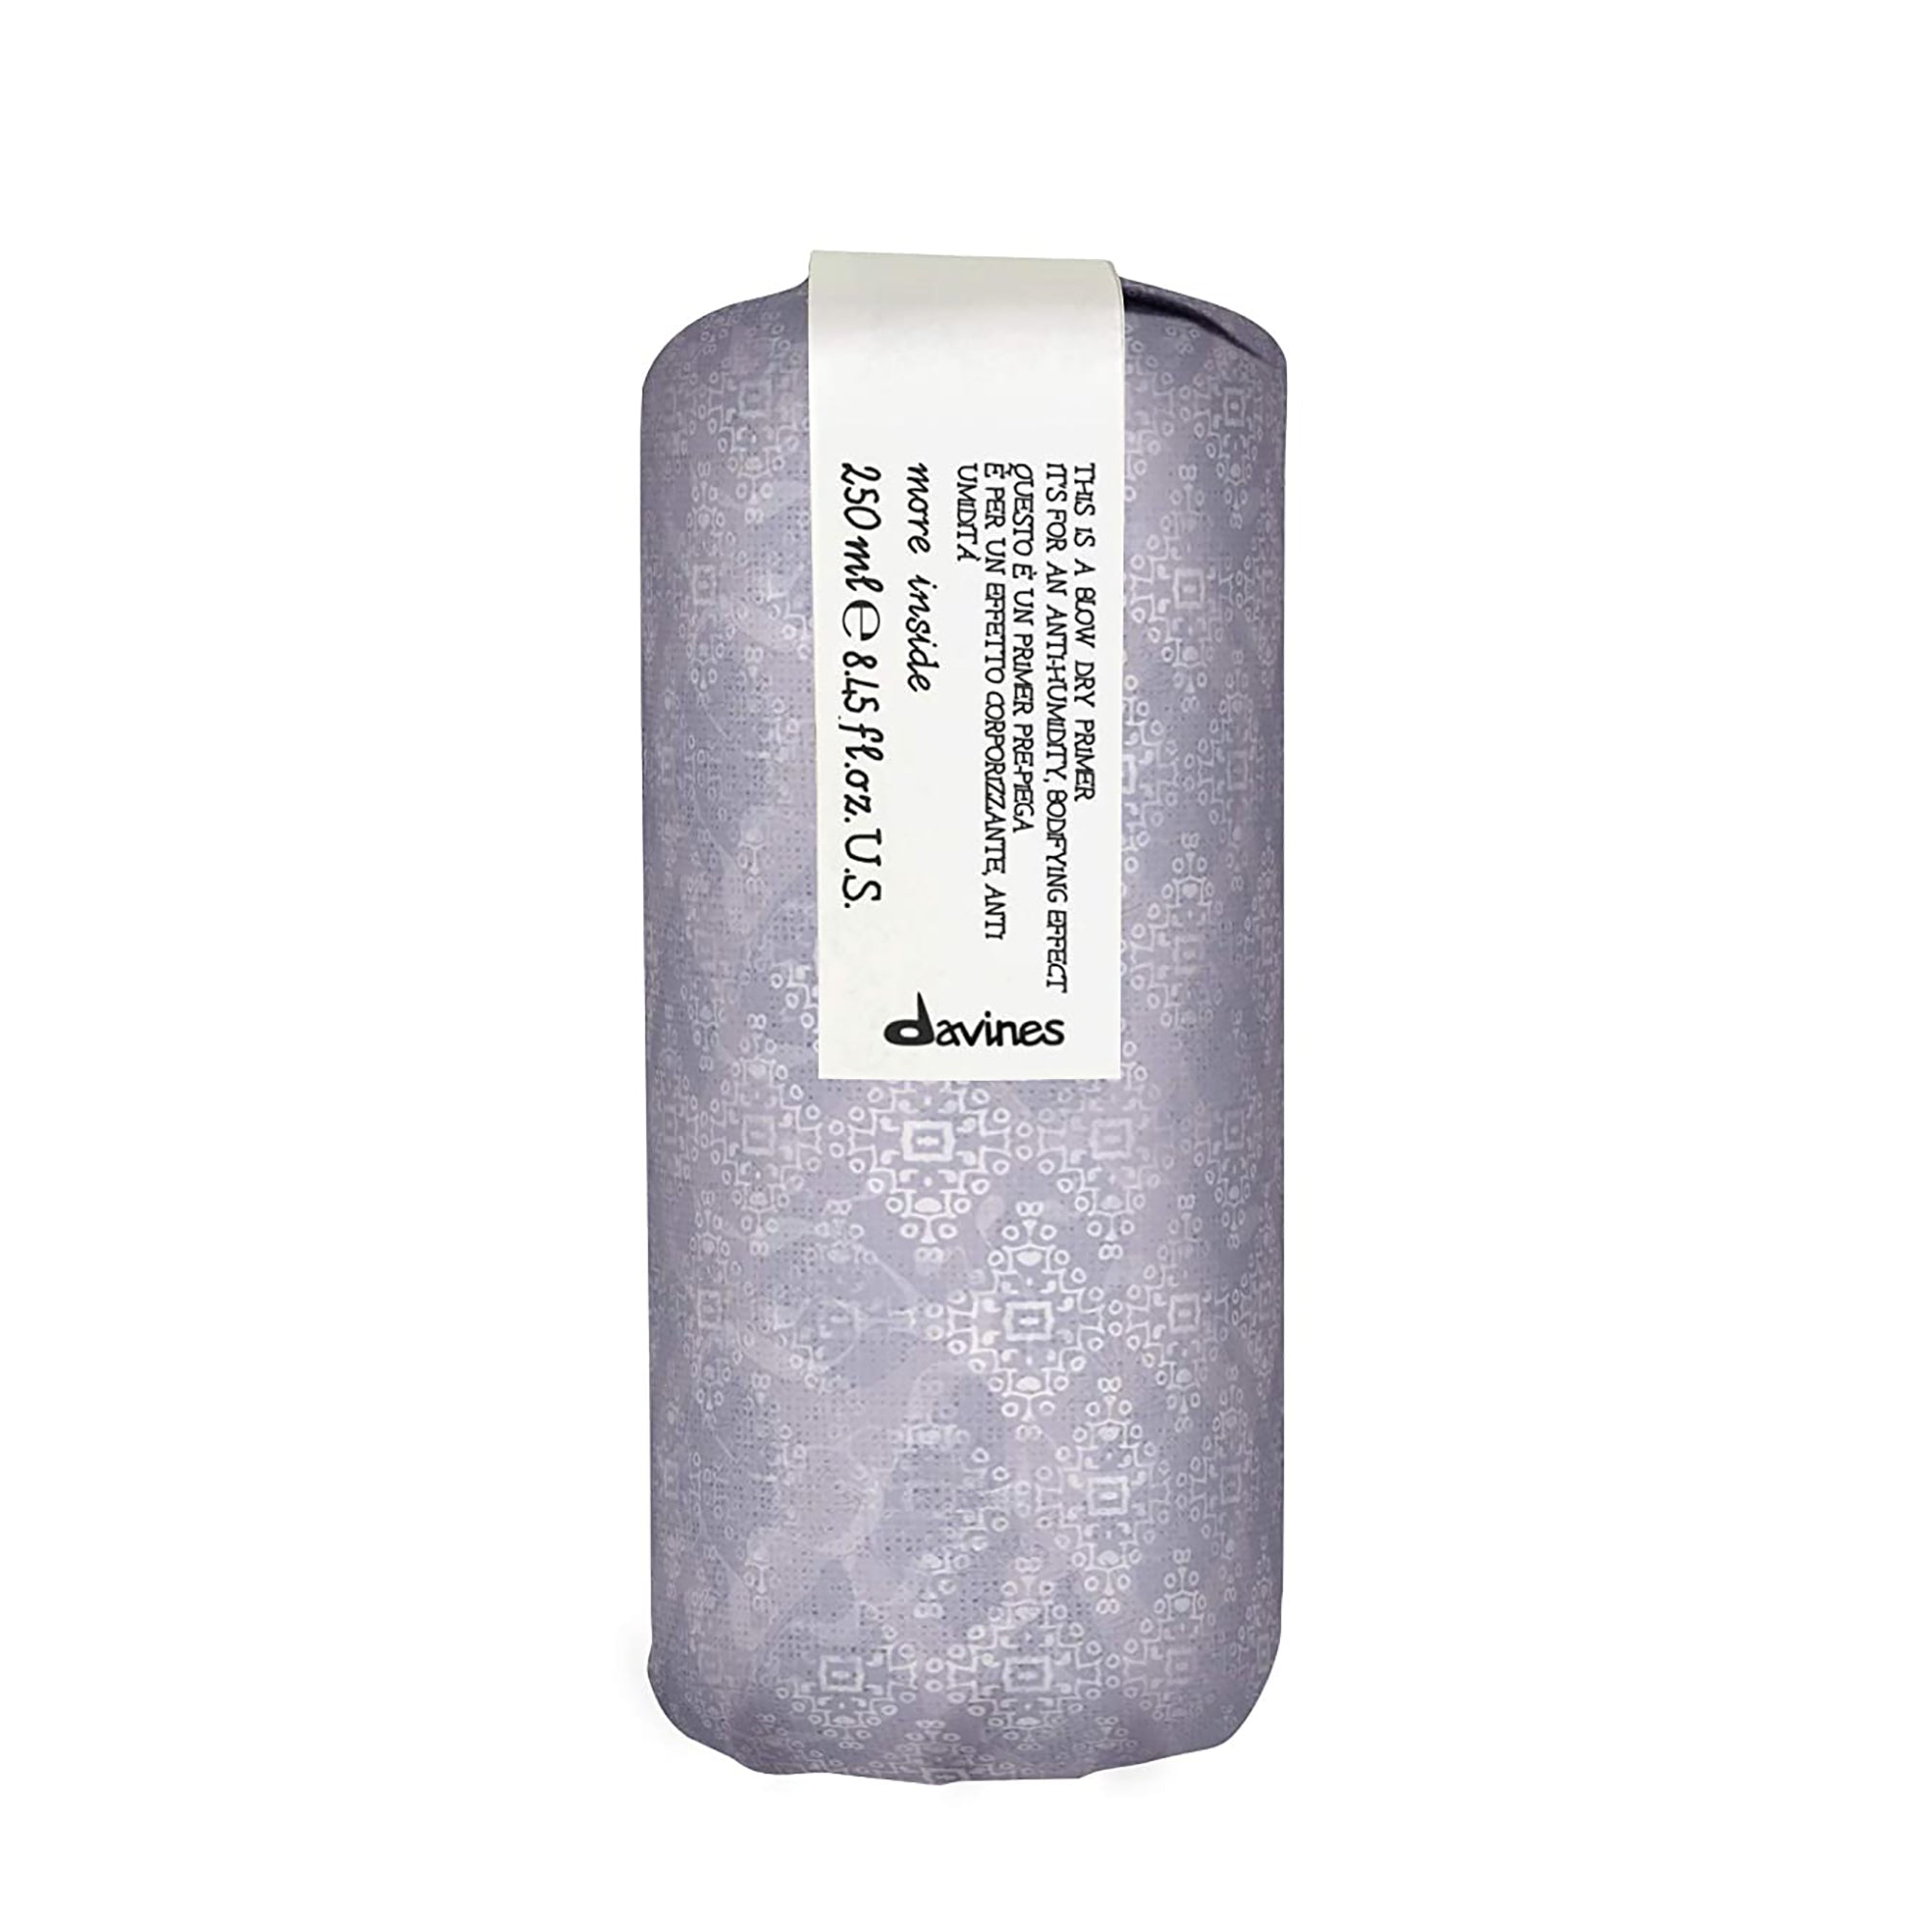 Davines This is a Blow Dry Primer / 8 OZ.